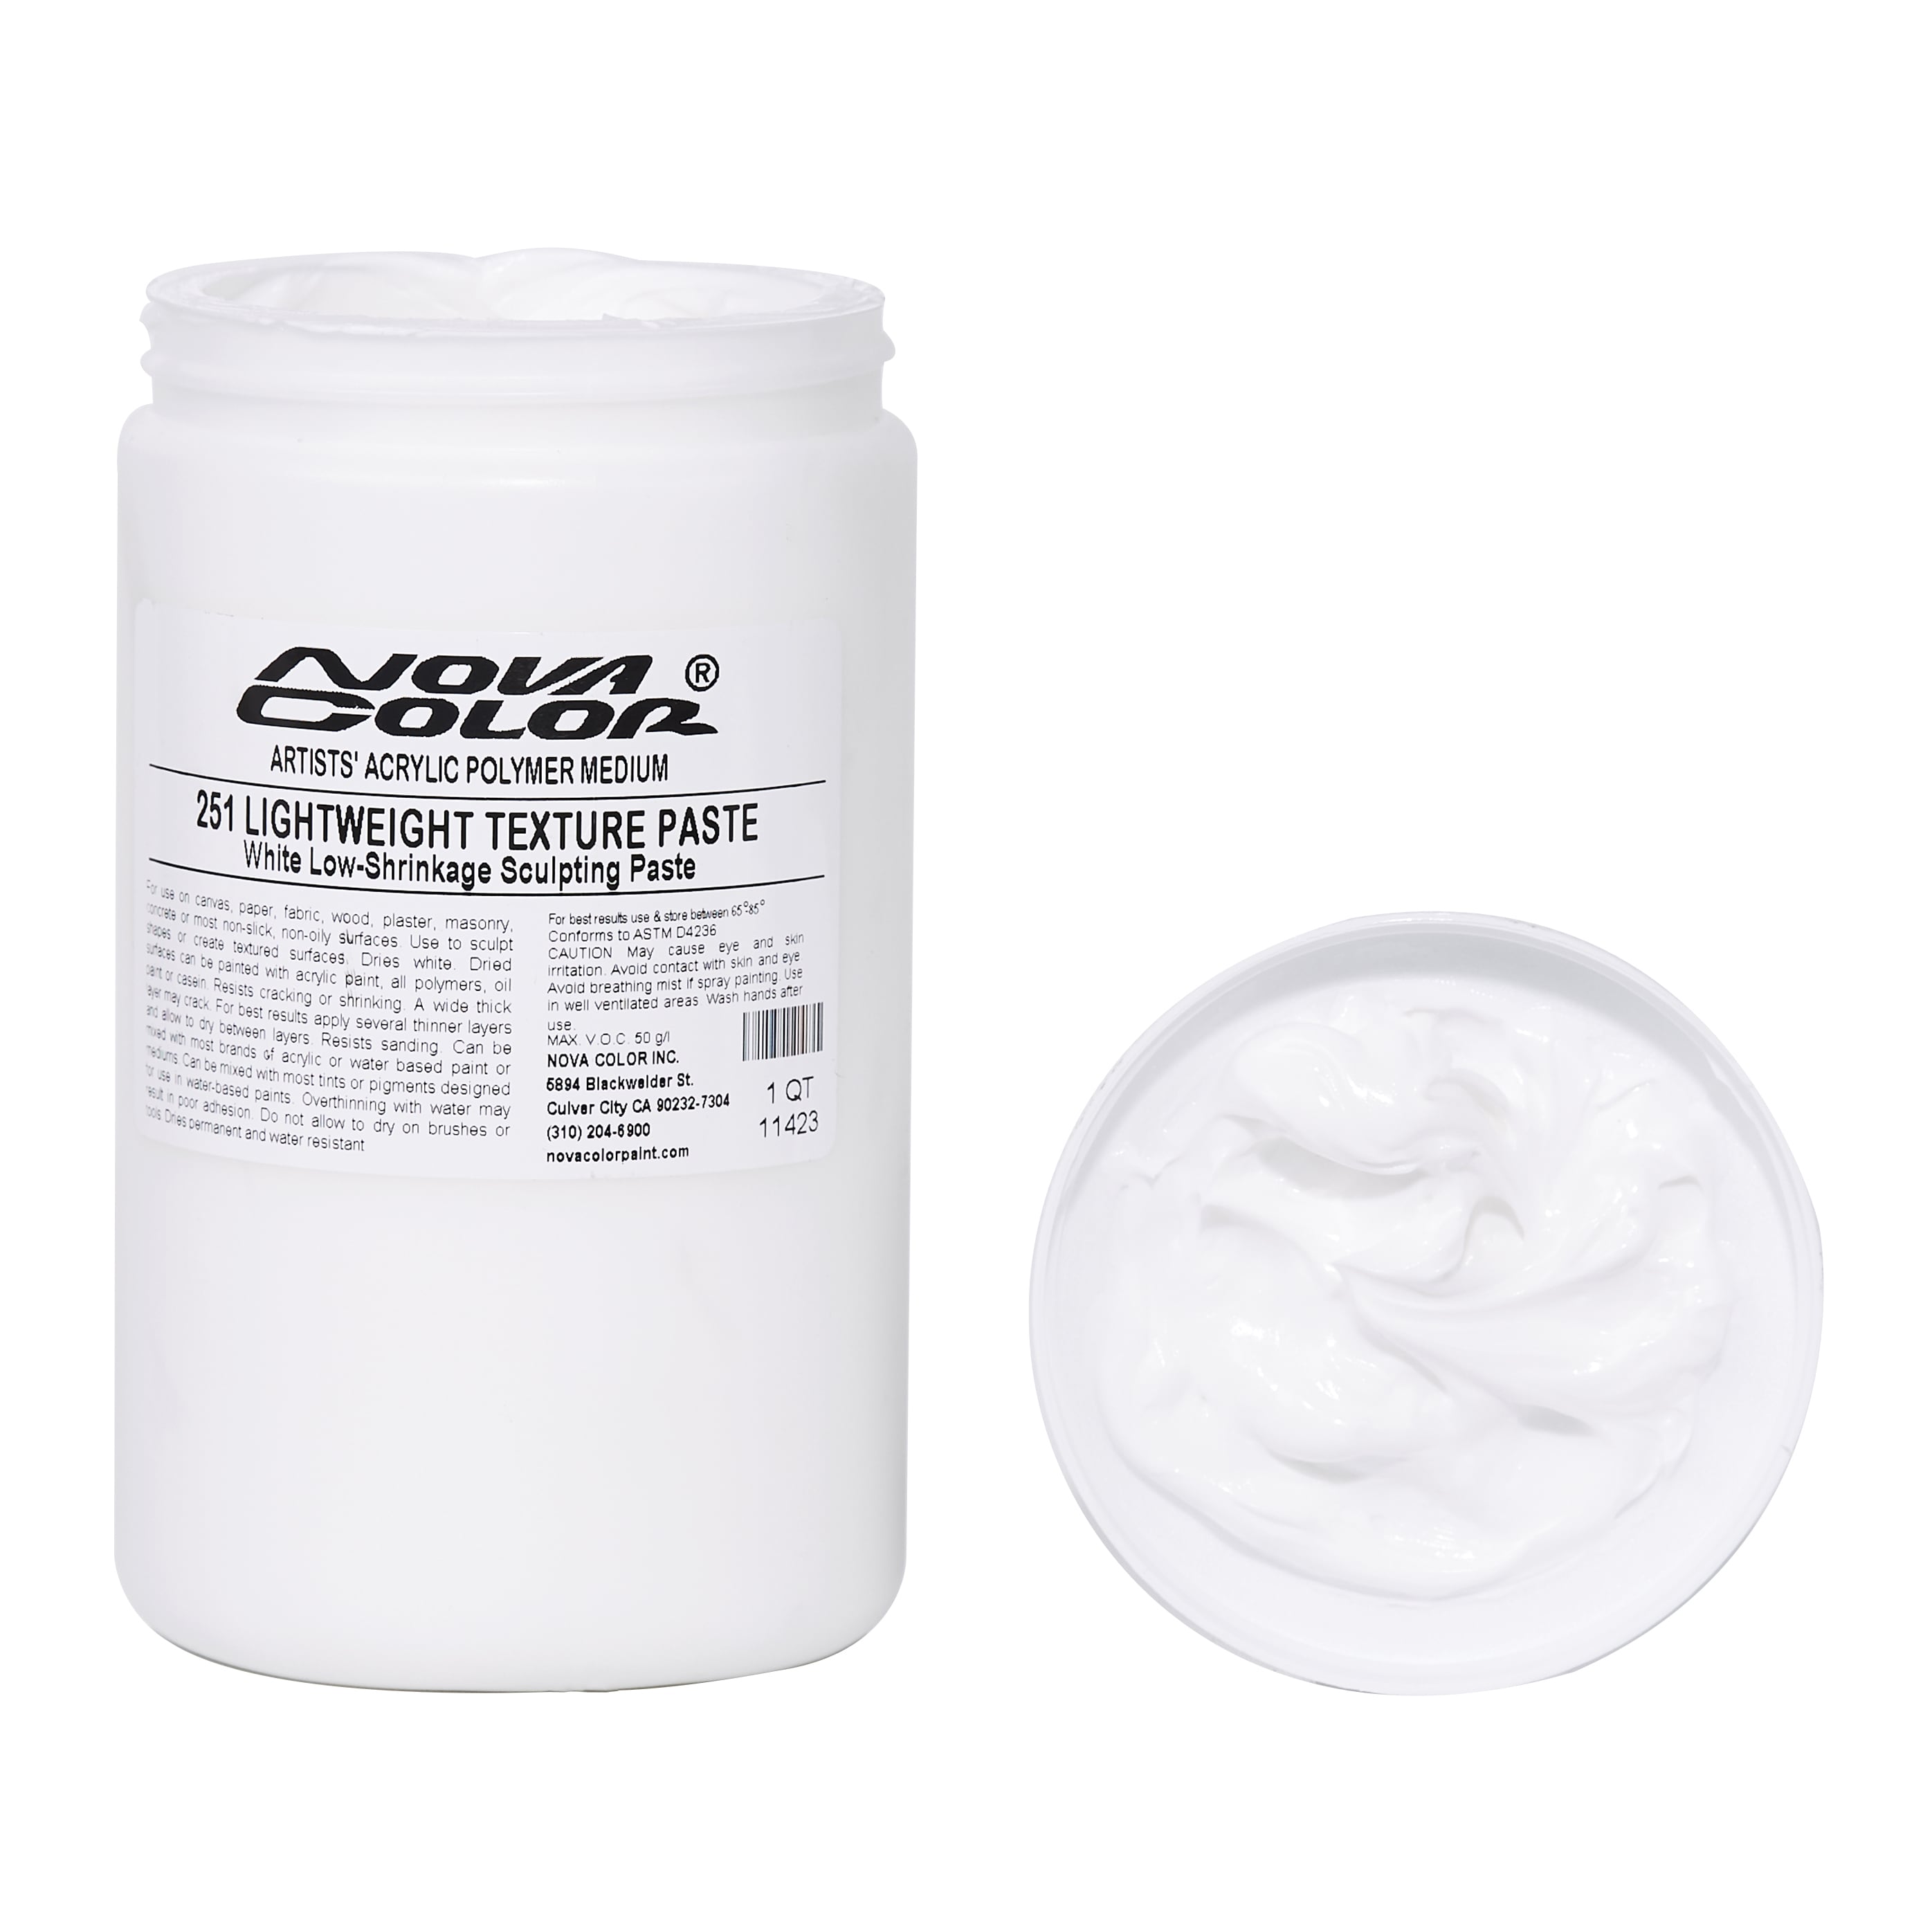 Making your own texture paste, White texture paste for Canvas  paintings